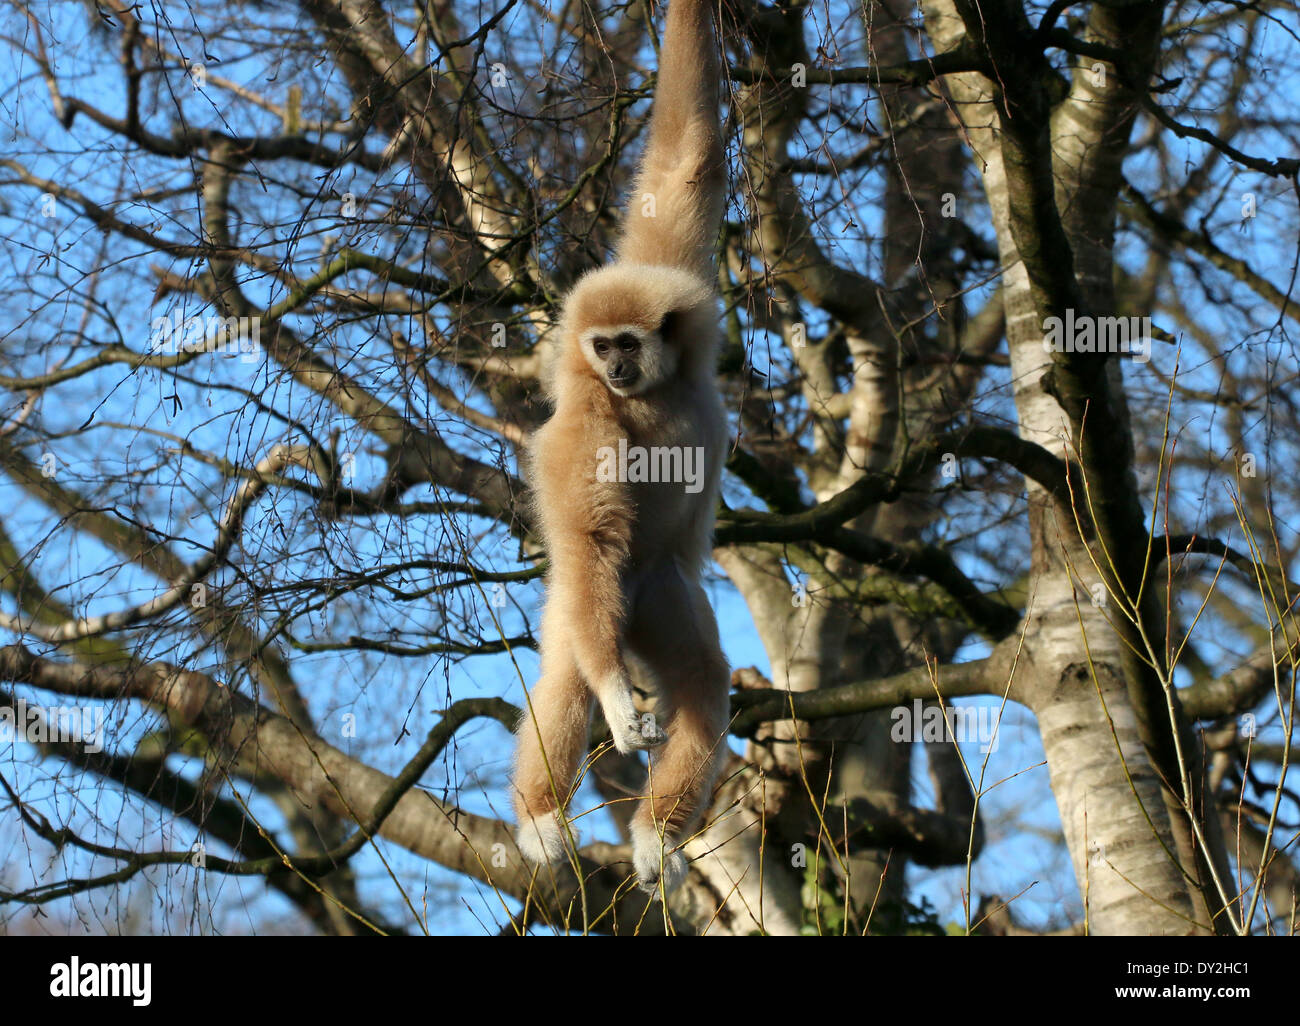 Mature Lar Gibbon or  White-Handed gibbon (Hylobates lar) in a tree, swinging from a branch Stock Photo